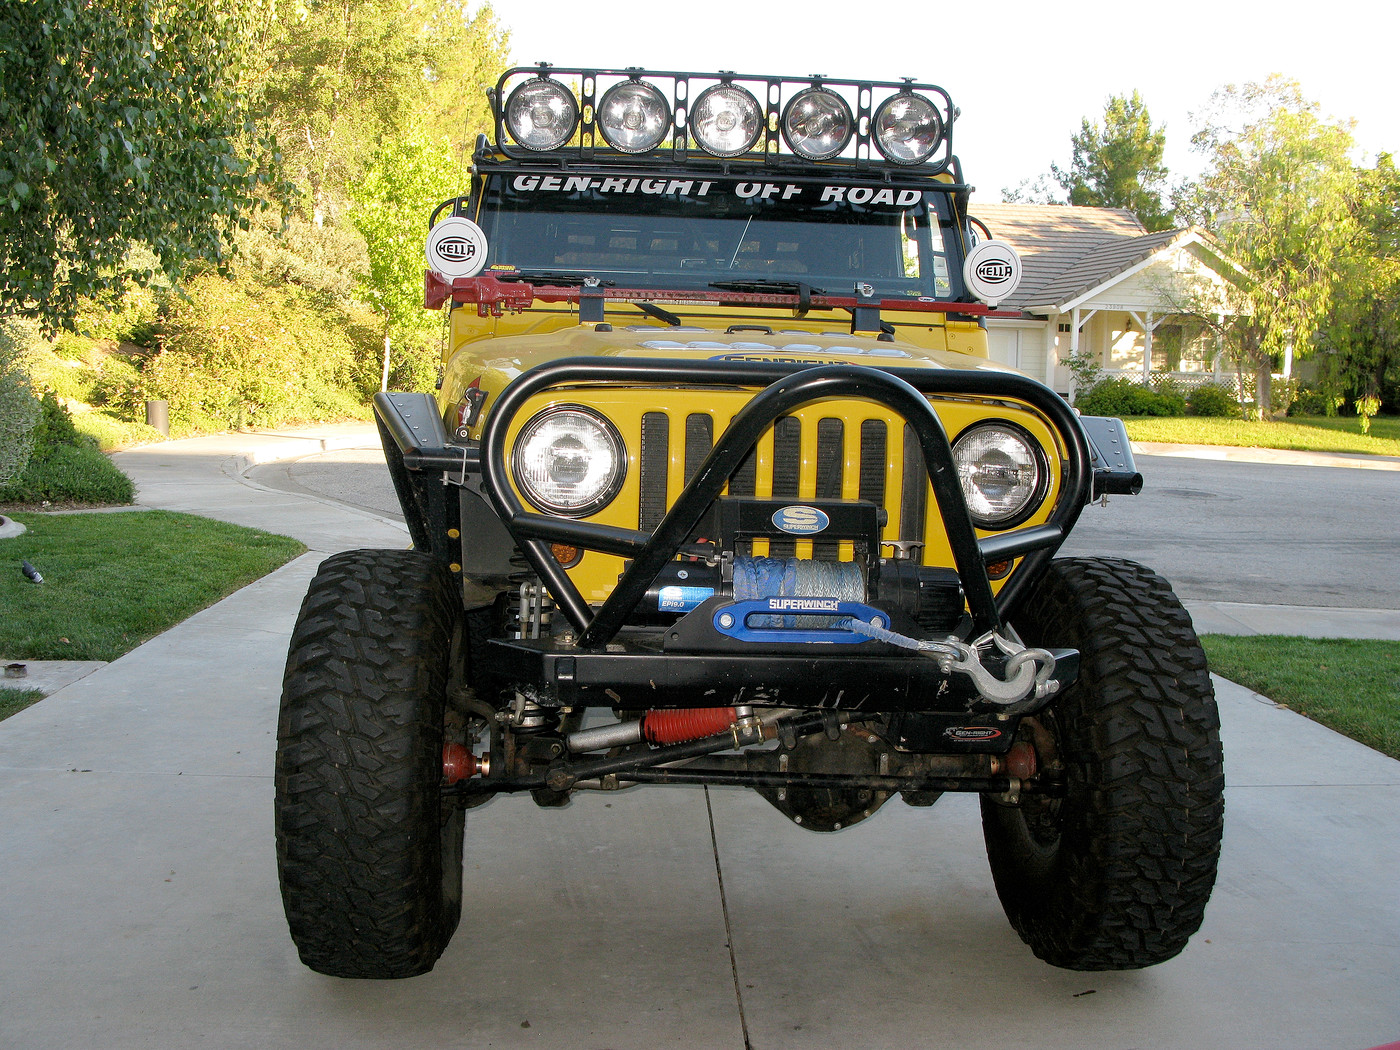 Tnt customs and jeep #1